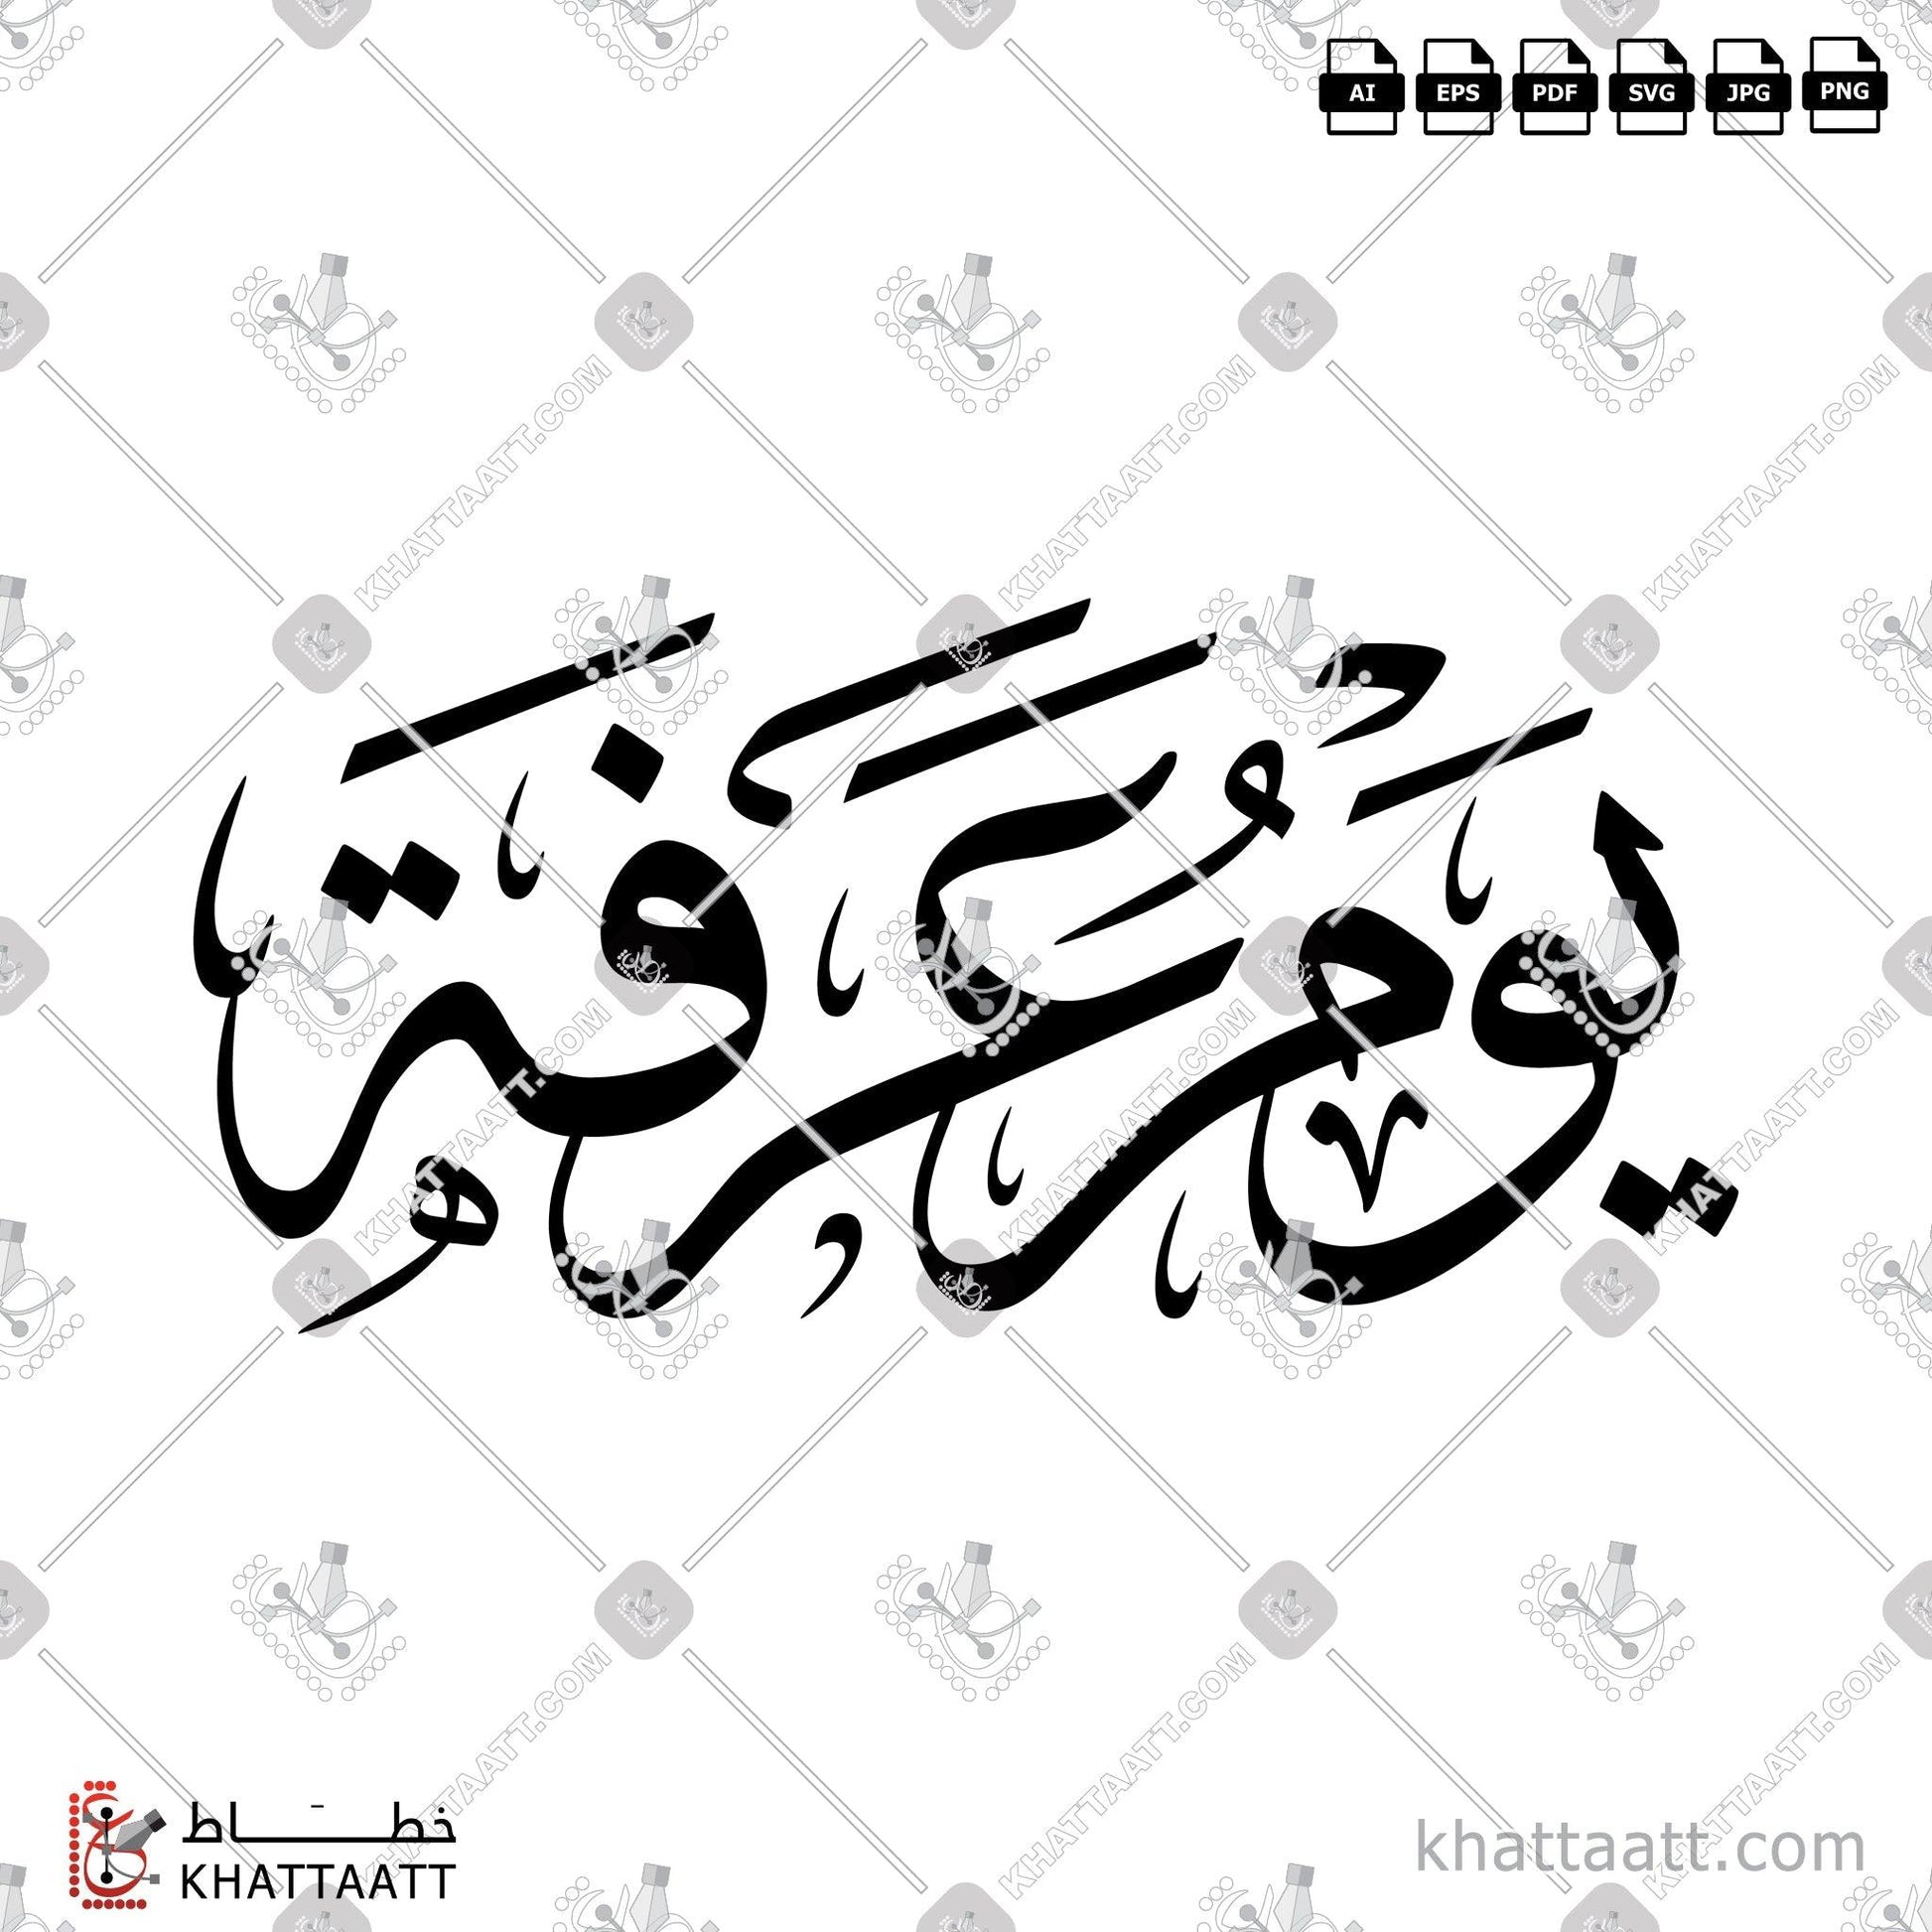 Download Arabic Calligraphy of Day of Arafah - يوم عرفة in Thuluth - خط الثلث in vector and .png